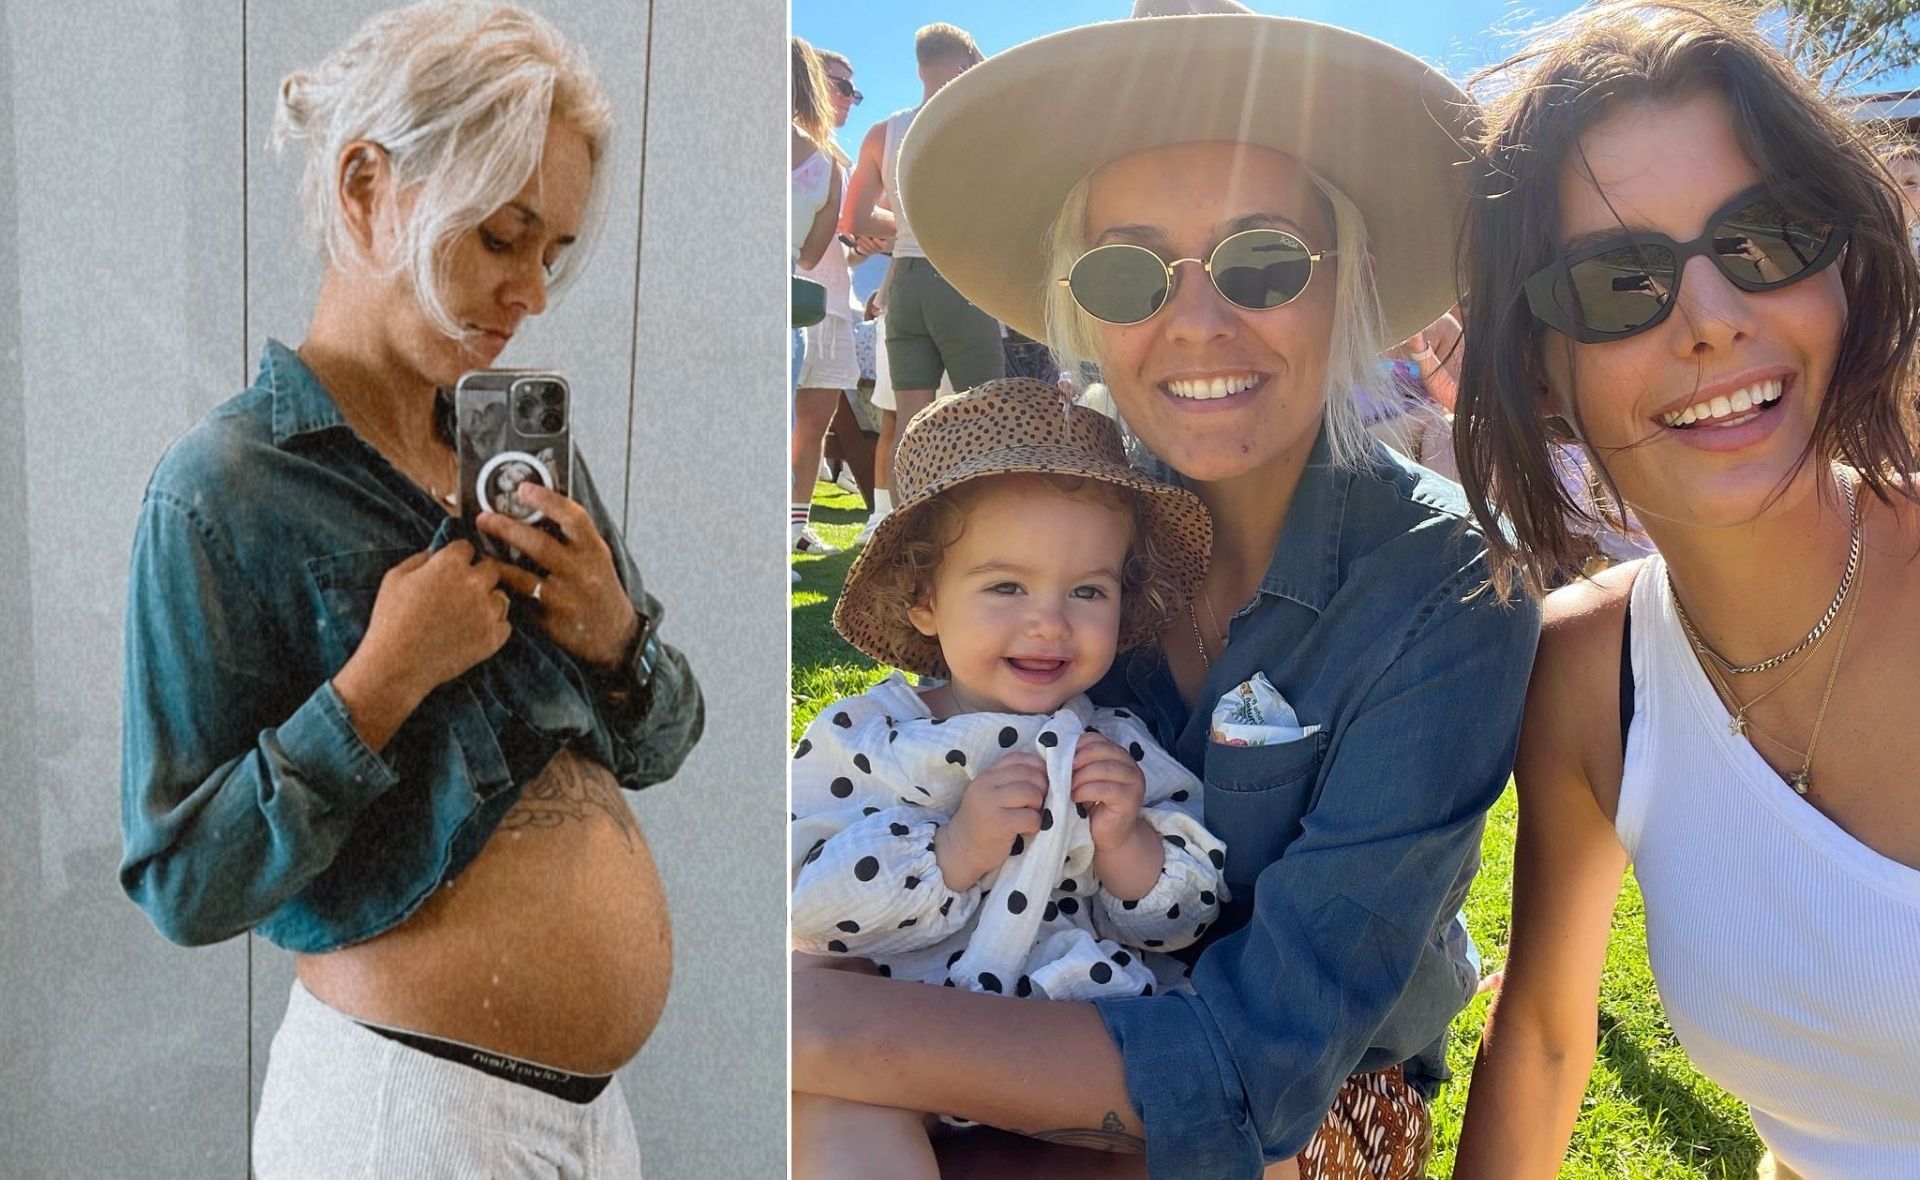 BABY NEWS! Moana Hope has given birth to her second child with wife Isabella Carlstrom